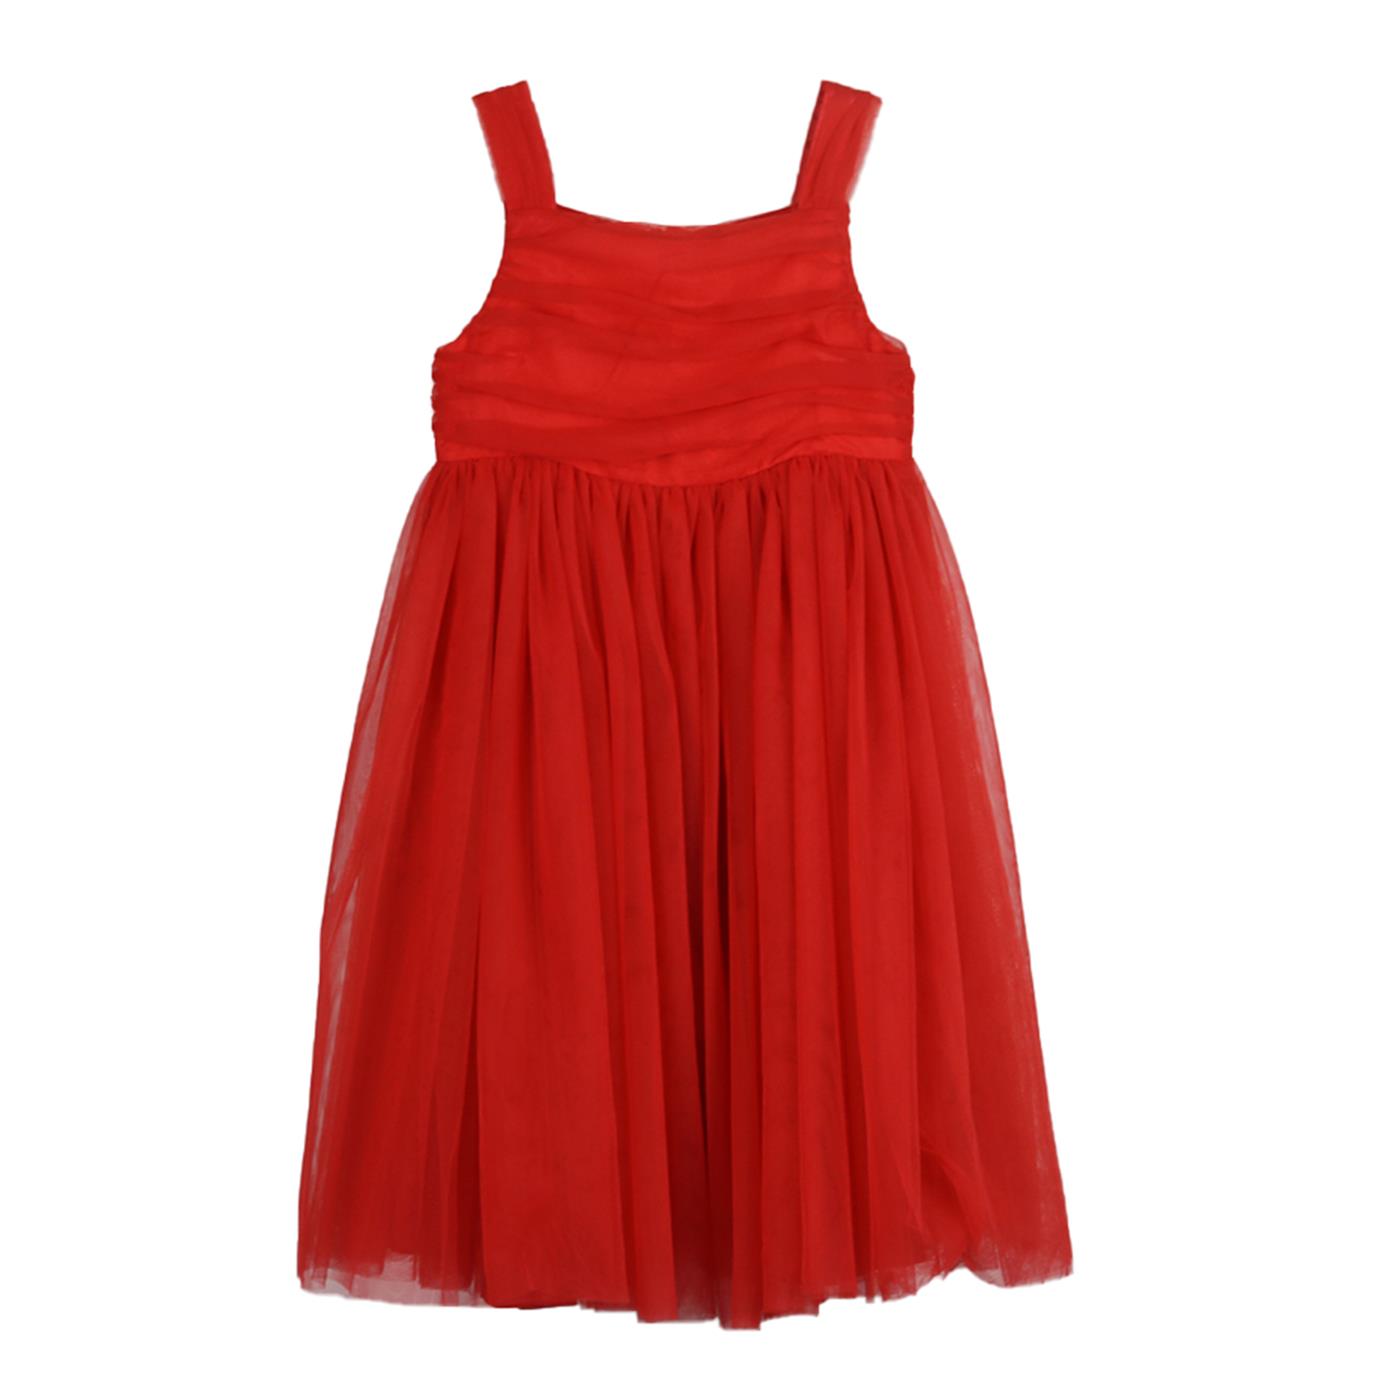 DOLCE AND GABBANA KIDS GIRLS TULLE DRESS 7-8 YEARS